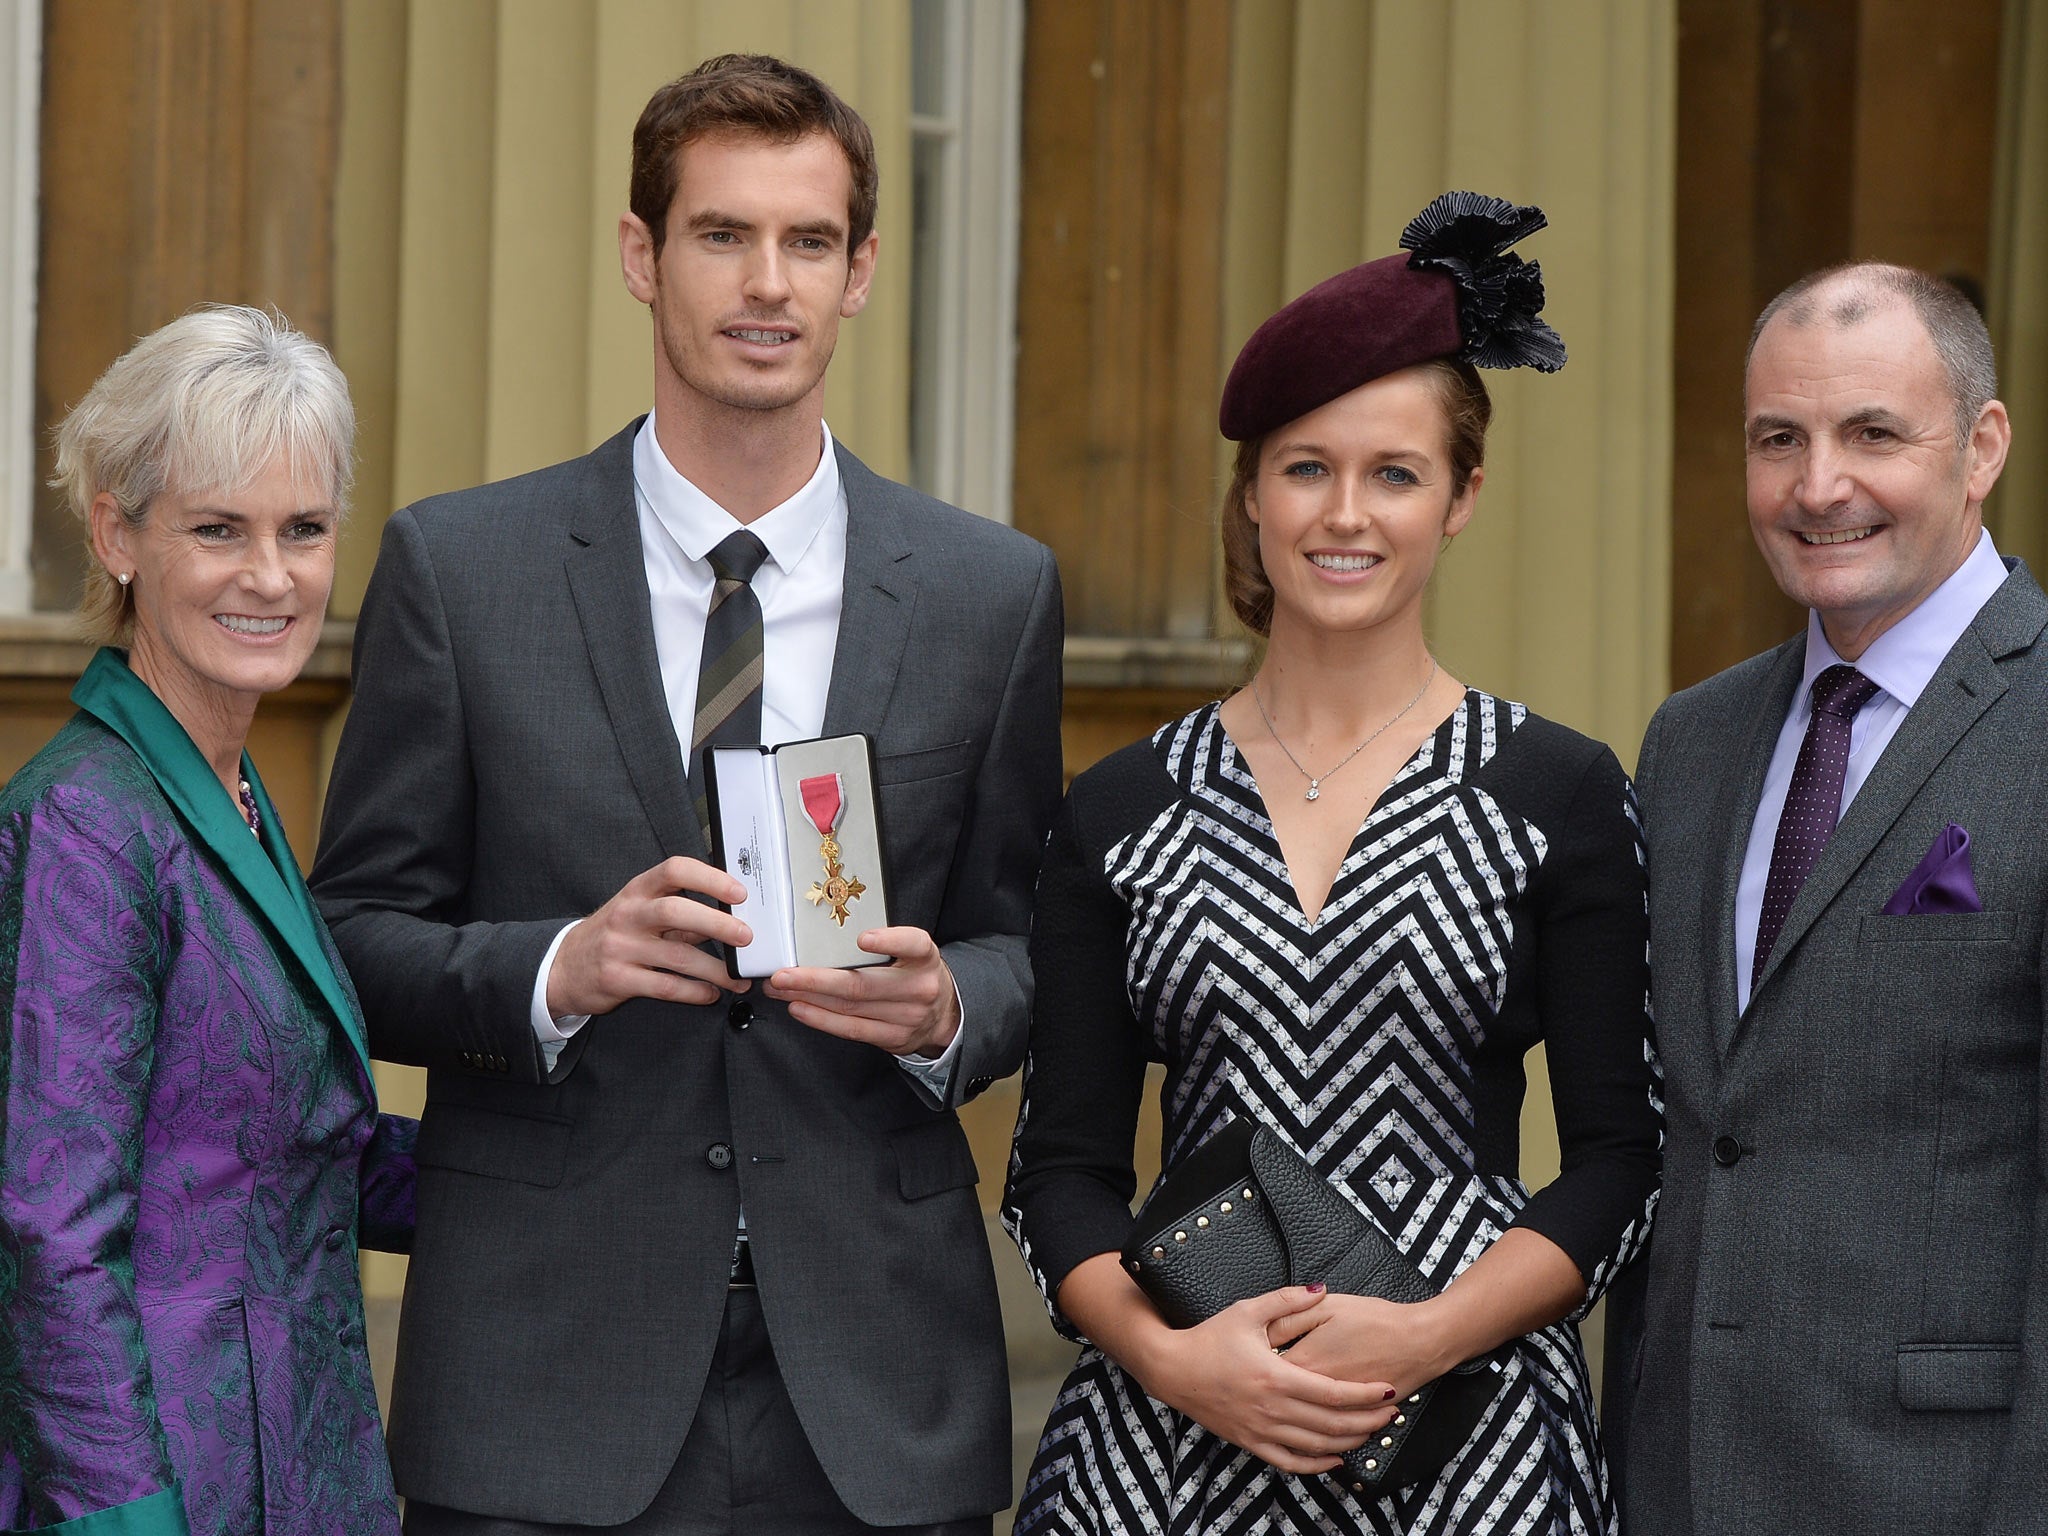 Wimbledon champion Andy Murray, his parents Judy and Will and his girlfriend Kim Sears pose at Buckingham Palace